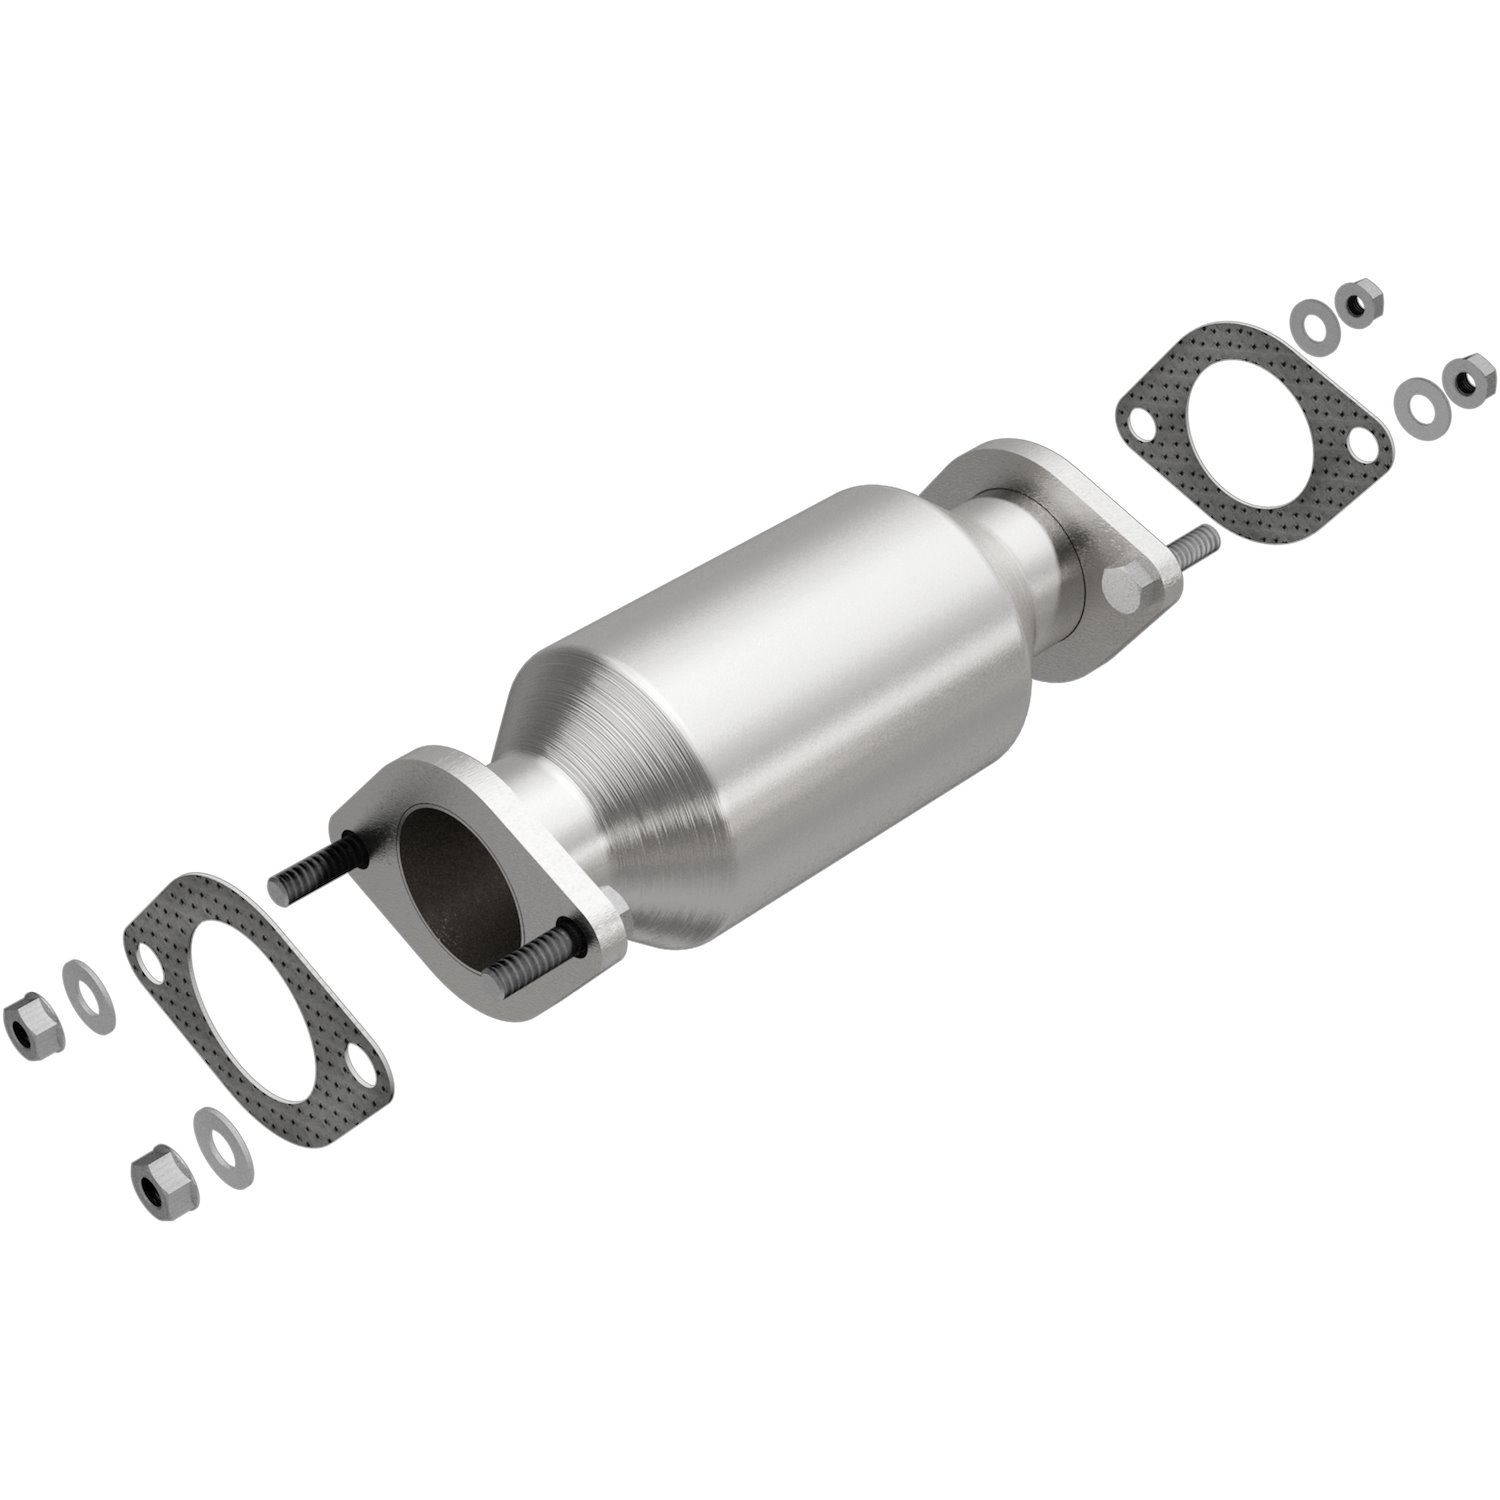 OEM Grade Federal / EPA Compliant Direct-Fit Catalytic Converter 49740